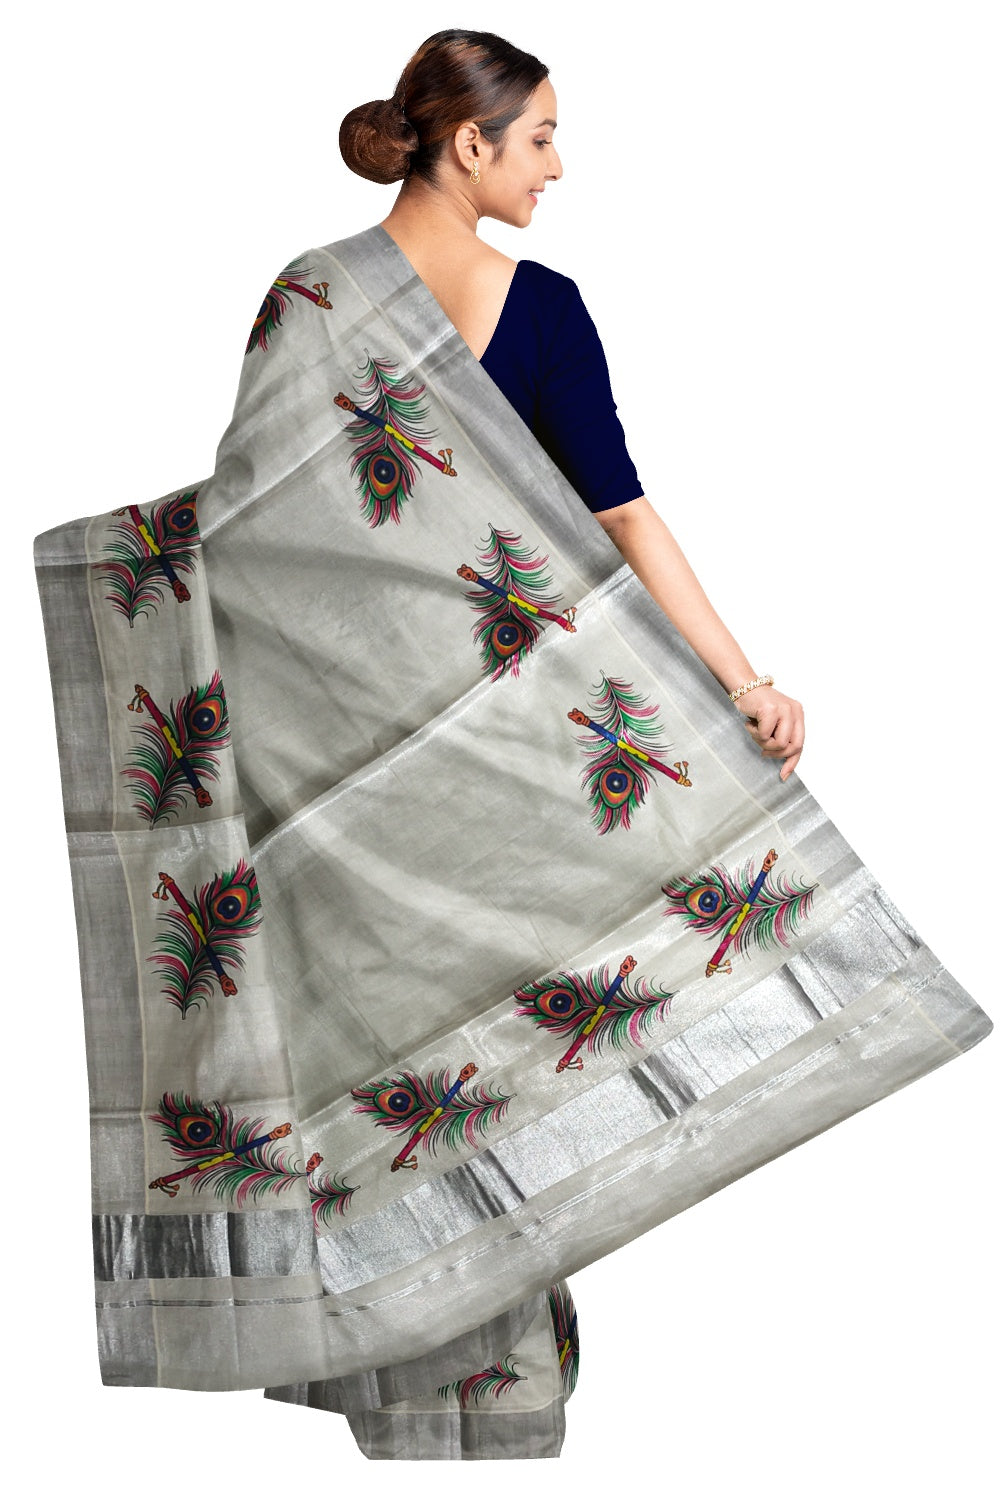 Kerala Silver Tissue Kasavu Onam Saree with Mural Peacock Feather and Flute Design